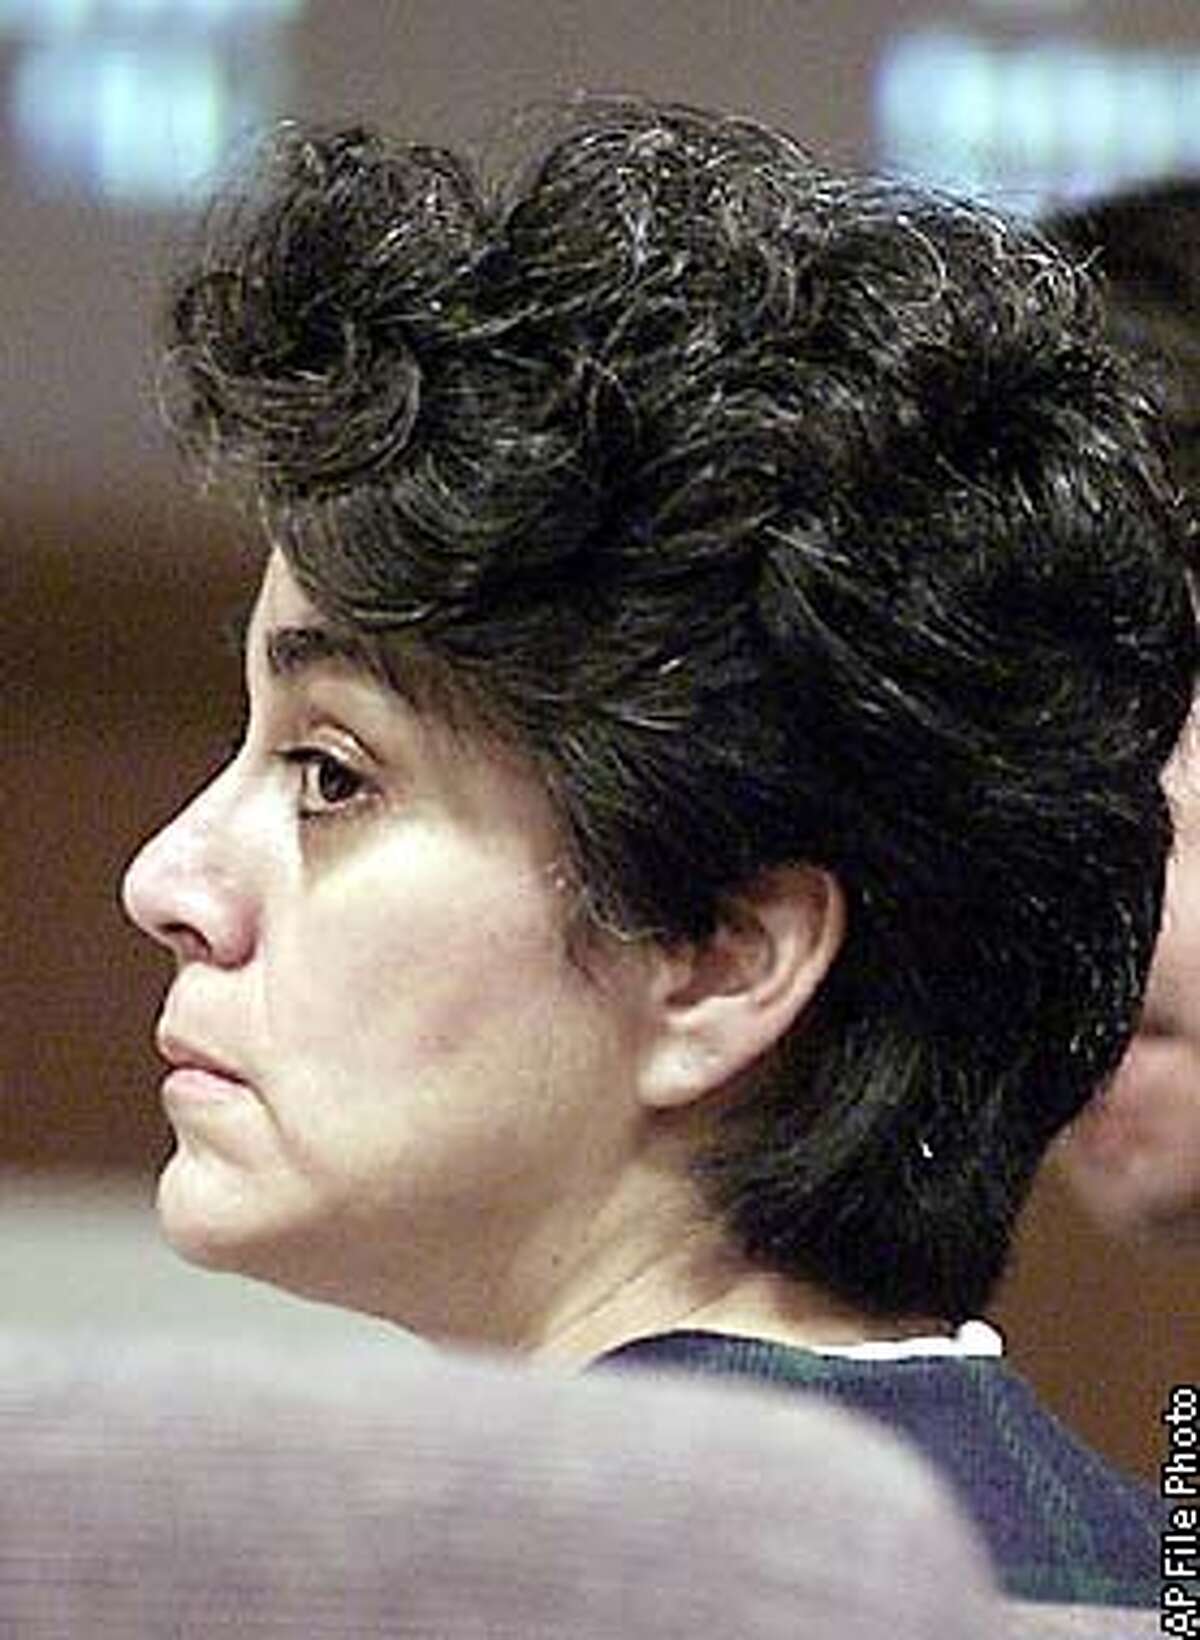 Socorro Caro listens as former Ventura County Medical Examiner Warren Lovell testifies as an expert witness in her murder trial at Ventura County Superior Court, Tuesday, Oct. 2, 2001, in Ventura, Calif. The defense used Lovell's testimony to further their claim that Caro did not shoot herself as the prosecution contends. Caro is accused of killing three of her four children in 1999. (AP Photo/Stephen Osman, Pool)